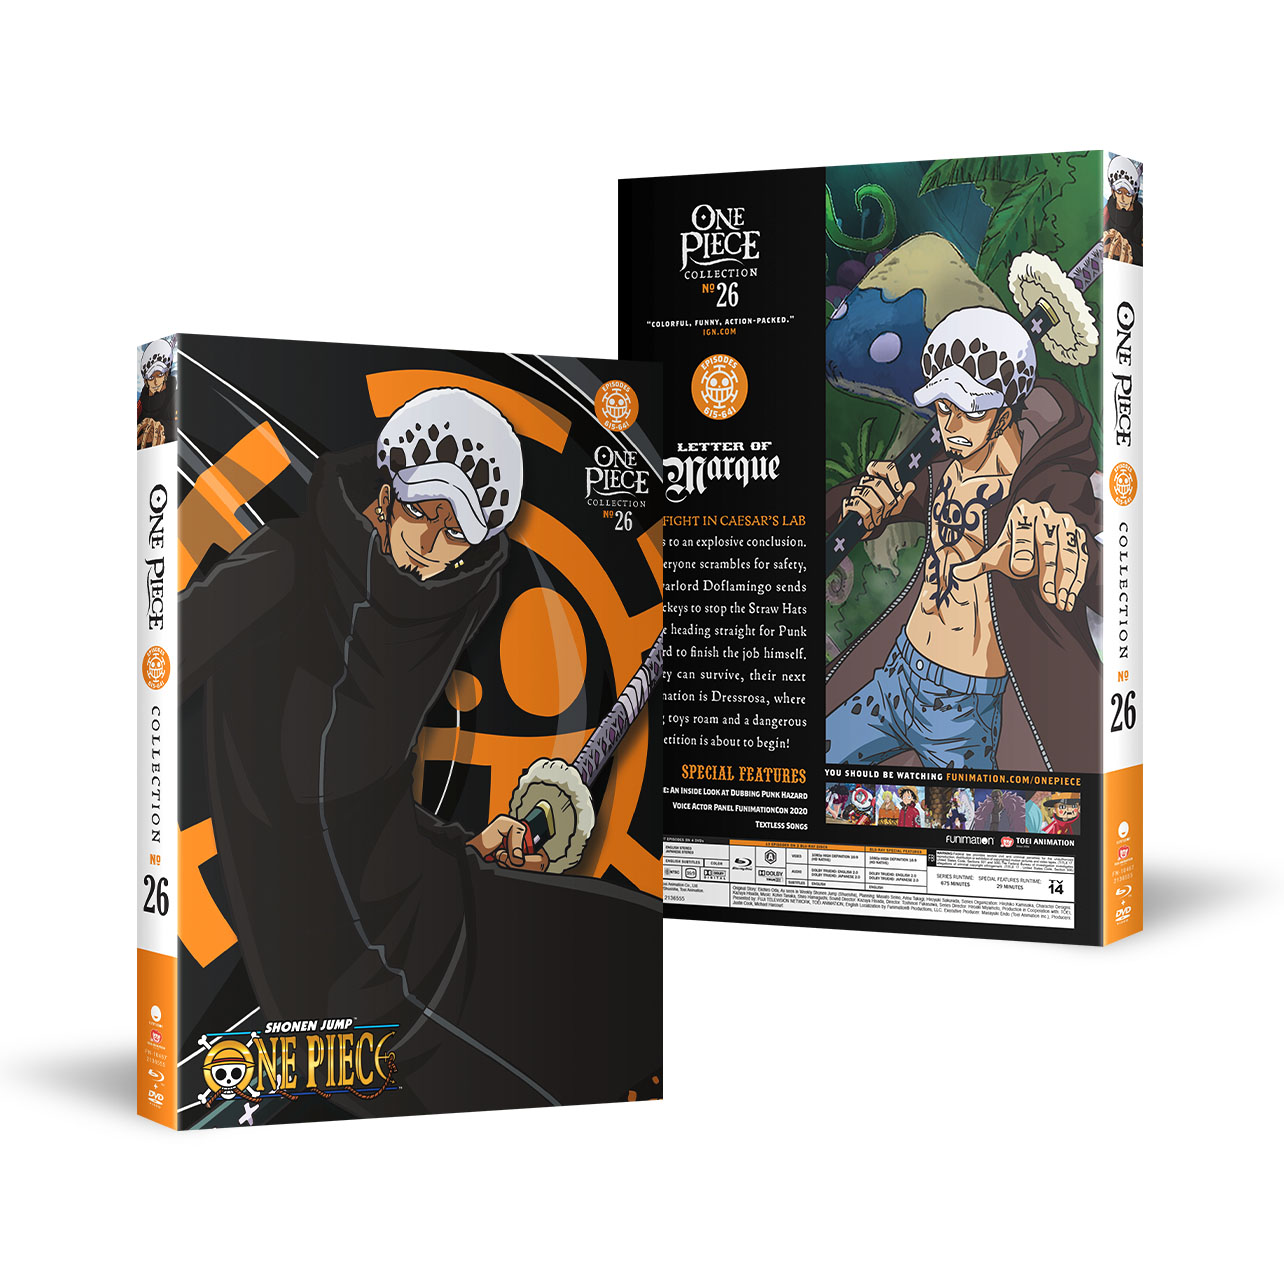 One Piece - Collection 26 - Blu-ray + DVD image count 0